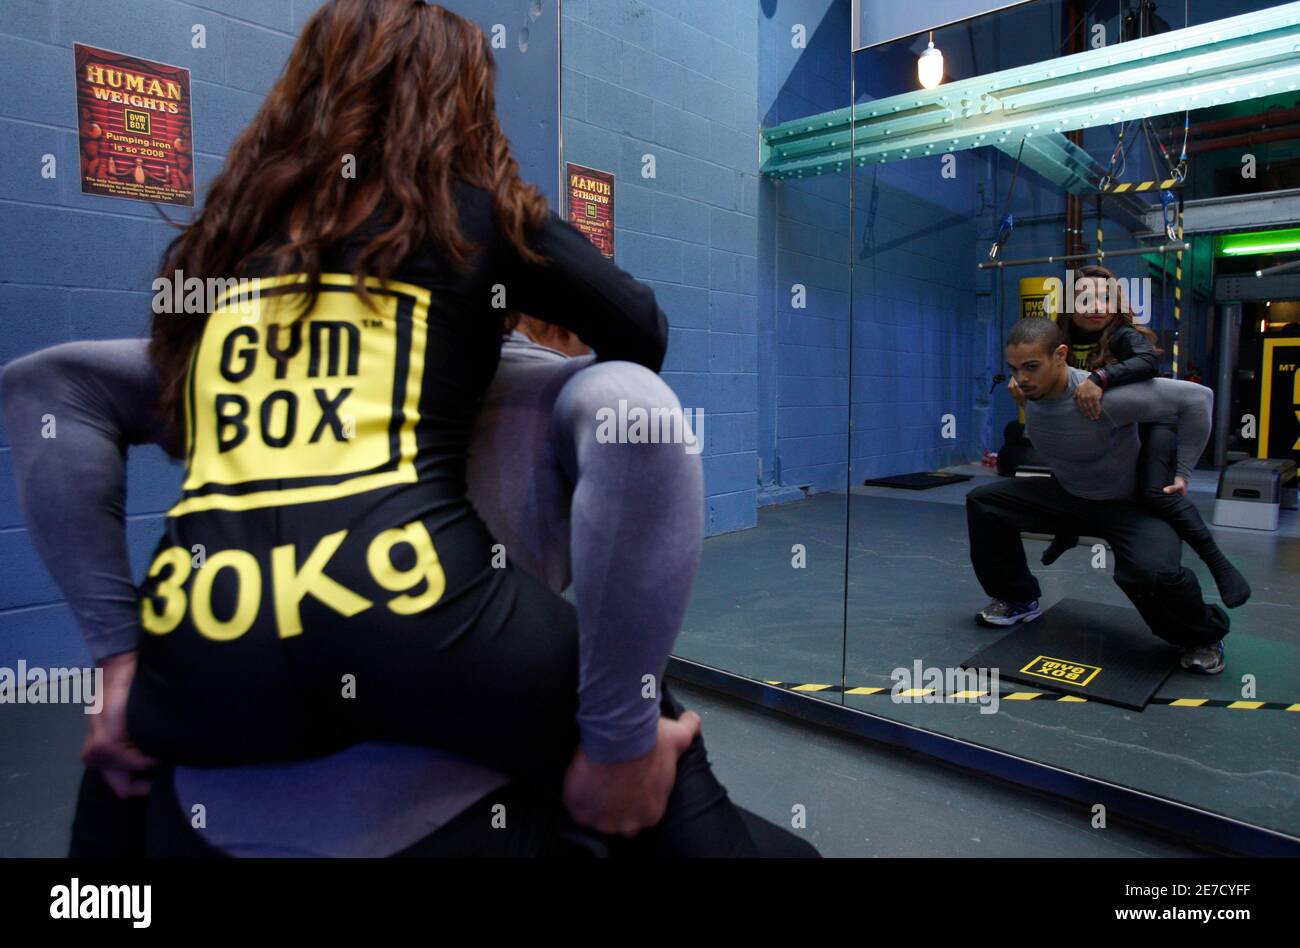 A fitness instructor does some squat exercises for photographers using a human weight at a Gymbox gym in London January 21, 2009. A British gym is trying to add human interest to otherwise dreary workouts by replacing traditional dumbbell weights with human ones.The Gymbox chain gym in central London says fitness enthusiasts can now swap their usual lumps of metal for human beings in a range of shapes and sizes.   REUTERS/Stephen Hird   (BRITAIN) Stock Photo